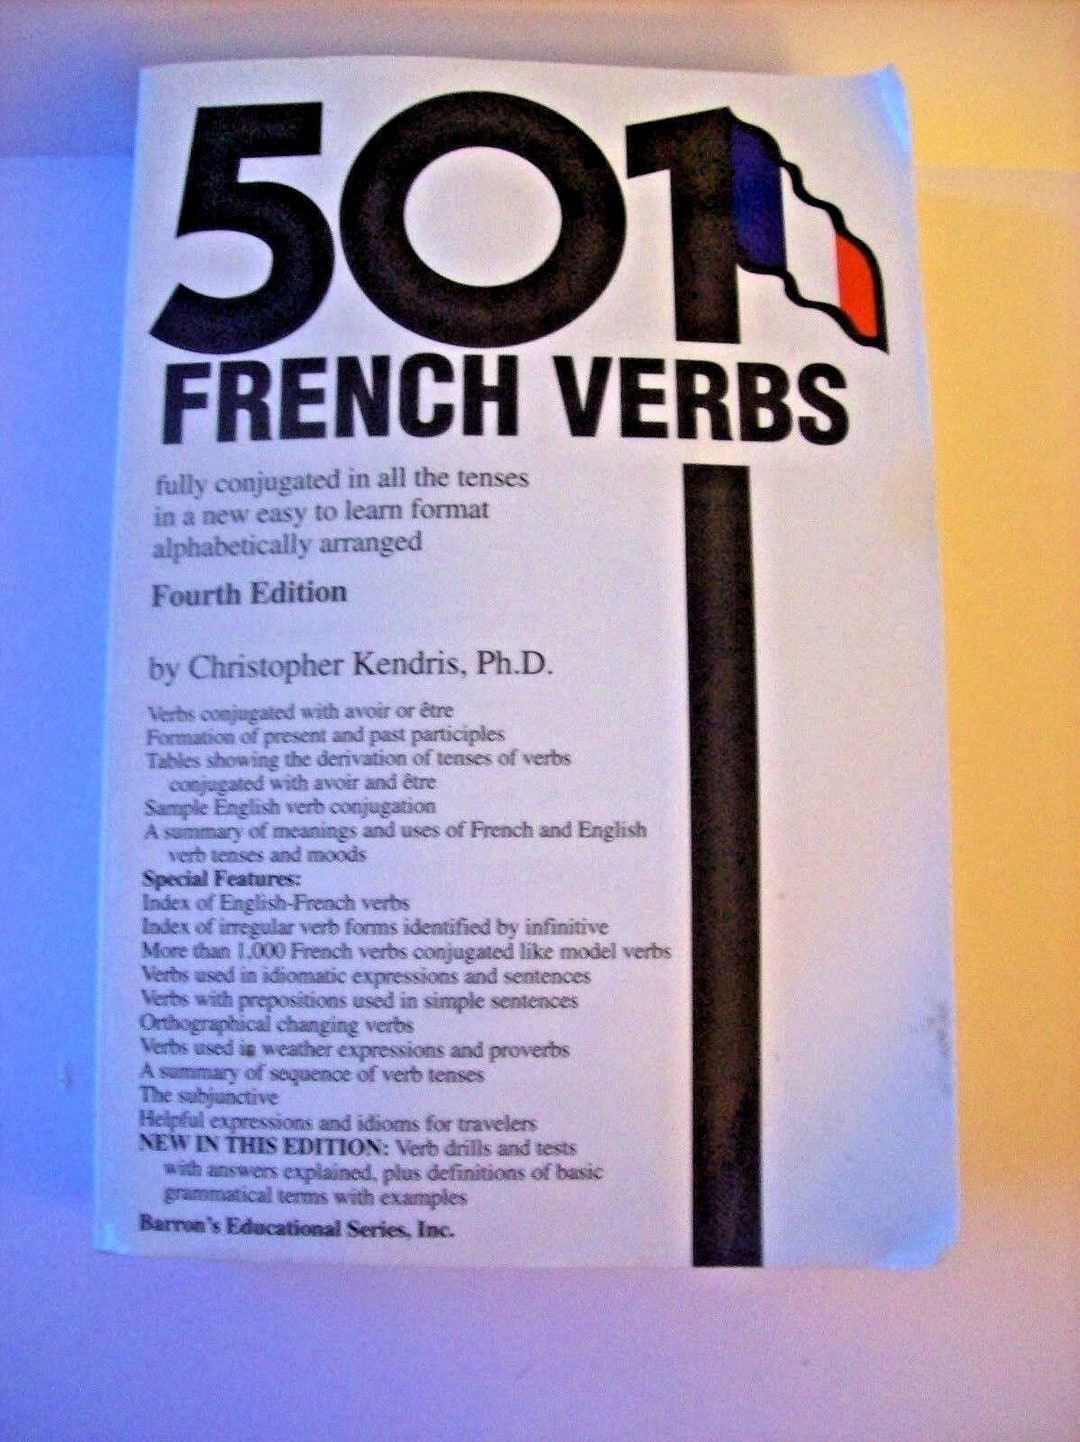 501 French Verbs Fully Conjugated In All The Tenses Vintage Etsy